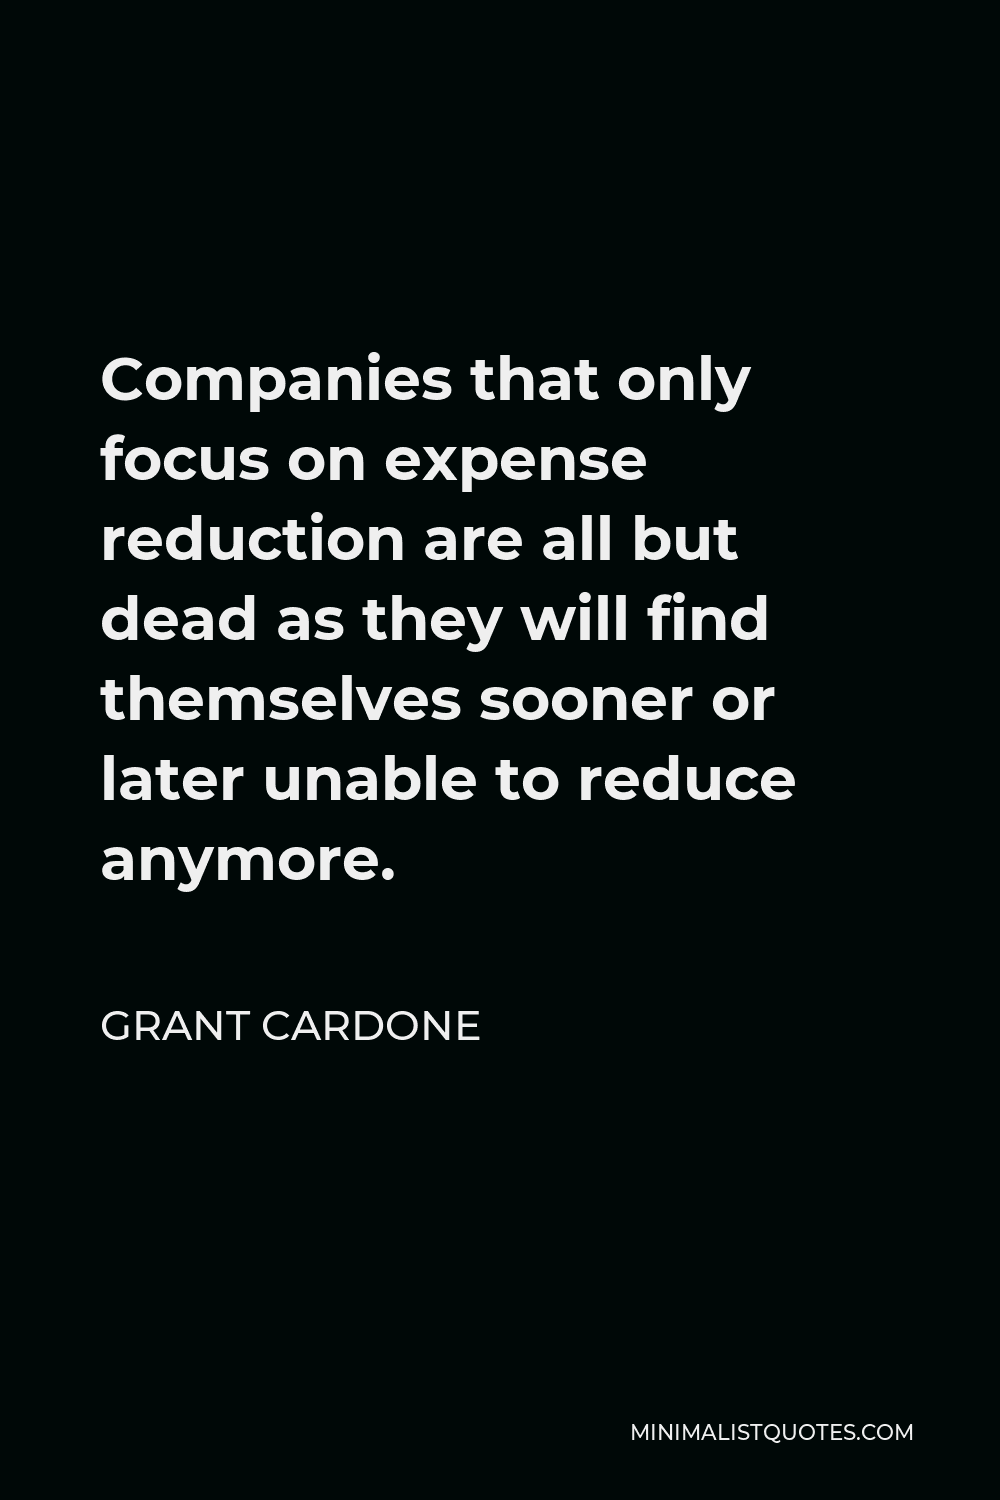 Grant Cardone Quote - Companies that only focus on expense reduction are all but dead as they will find themselves sooner or later unable to reduce anymore.